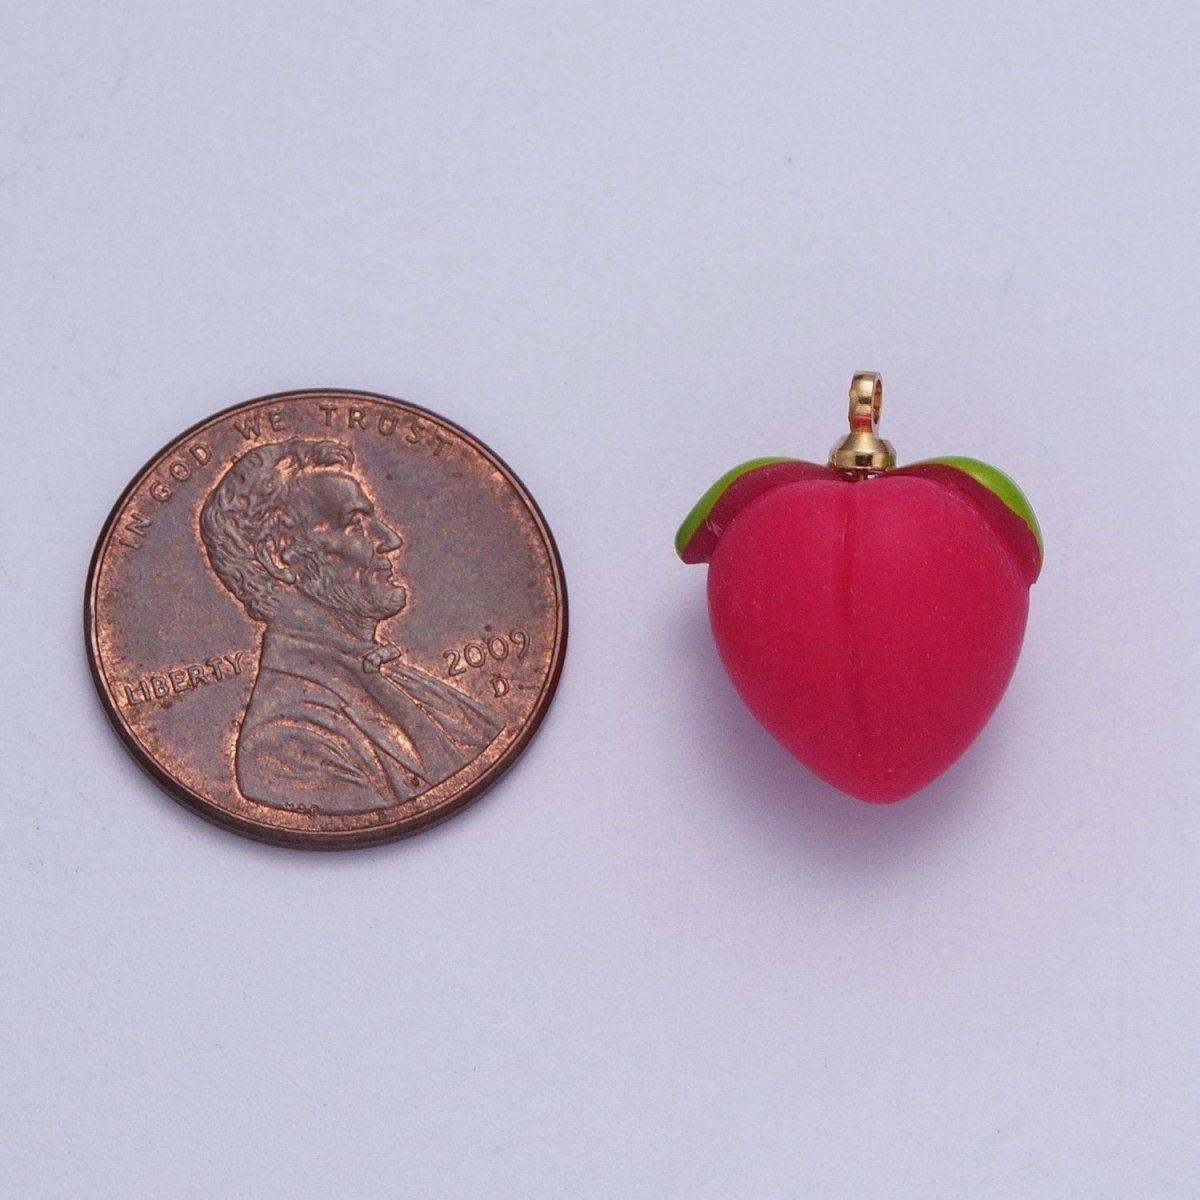 Mini Hot Pink Red Peach Charm For DIY Summer Fruits Jewelry Making | X-750 - DLUXCA